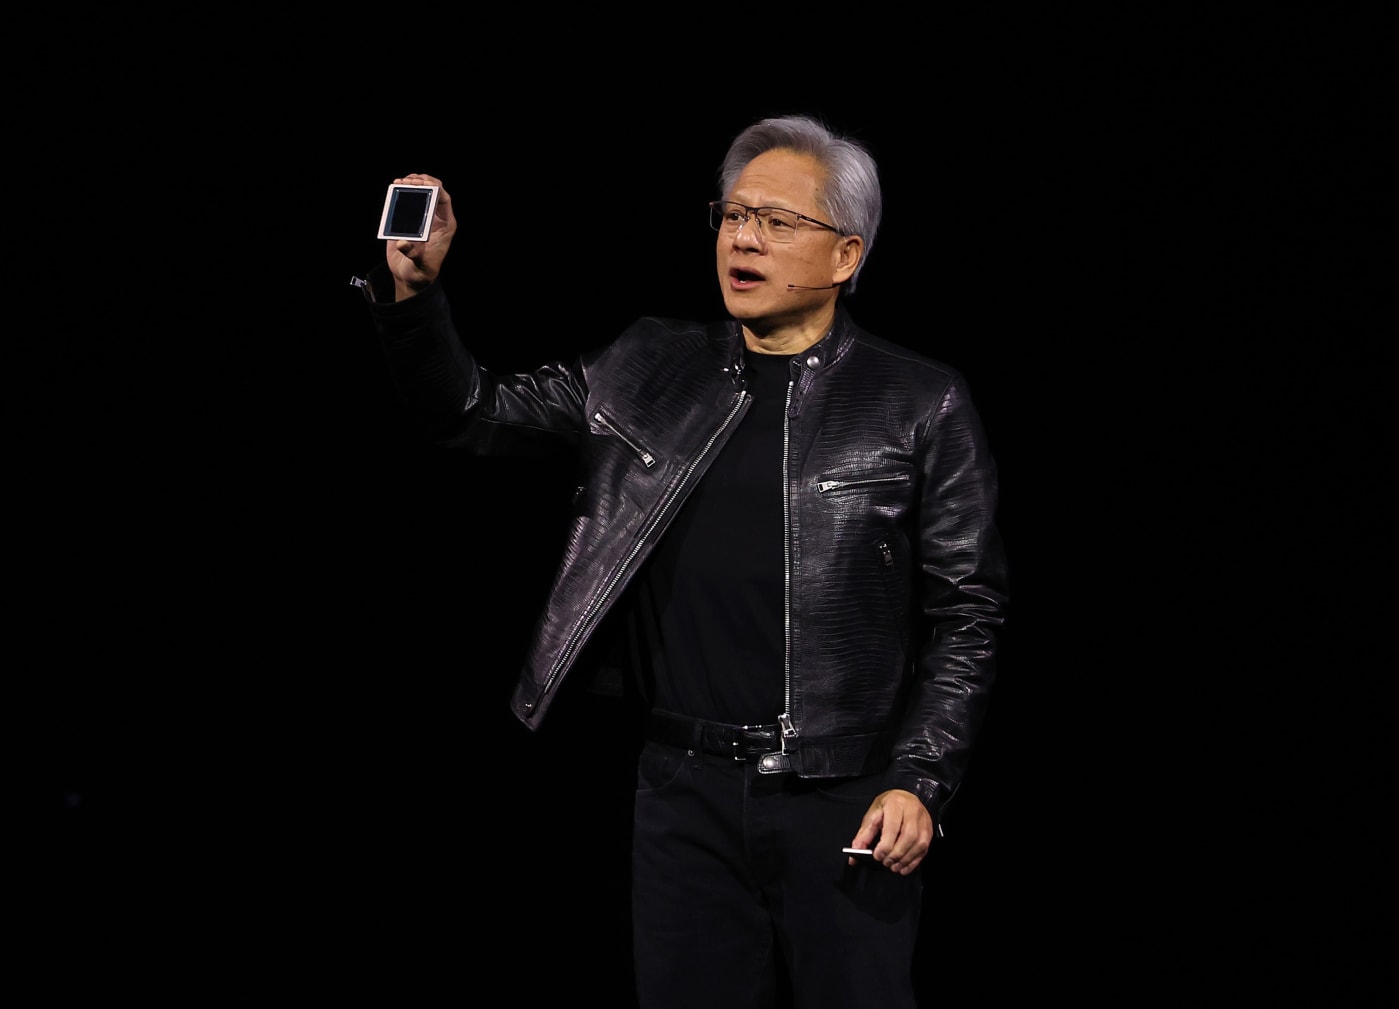 NVIDIA's GPUs powered the AI revolution. Its new Blackwell chips are up to 30 times faster